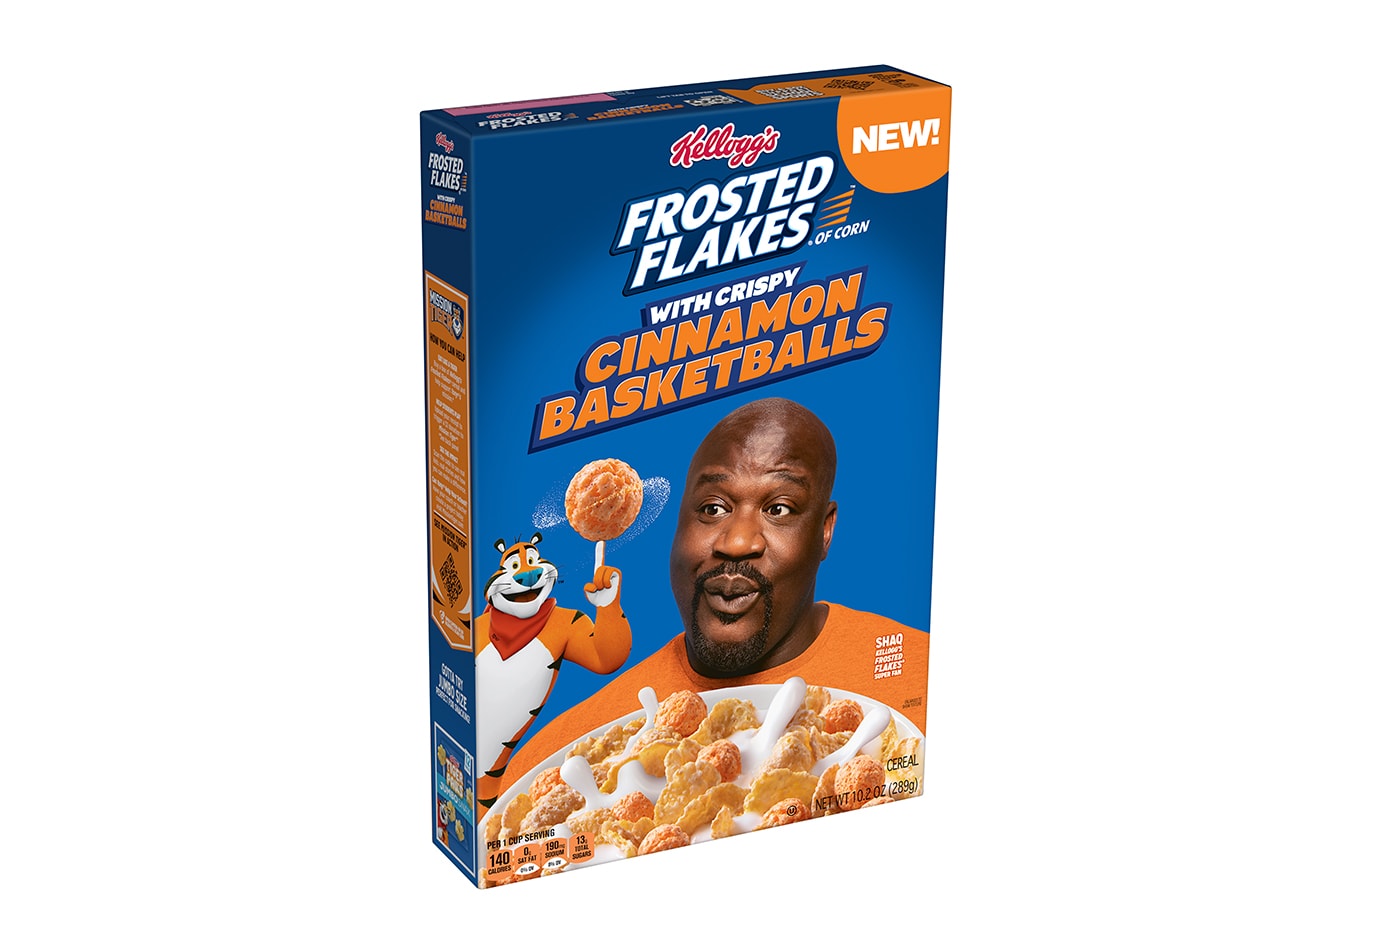 Shaquille O'Neal Kellogg’s Frosted Flakes with Crispy Cinnamon Basketballs Release